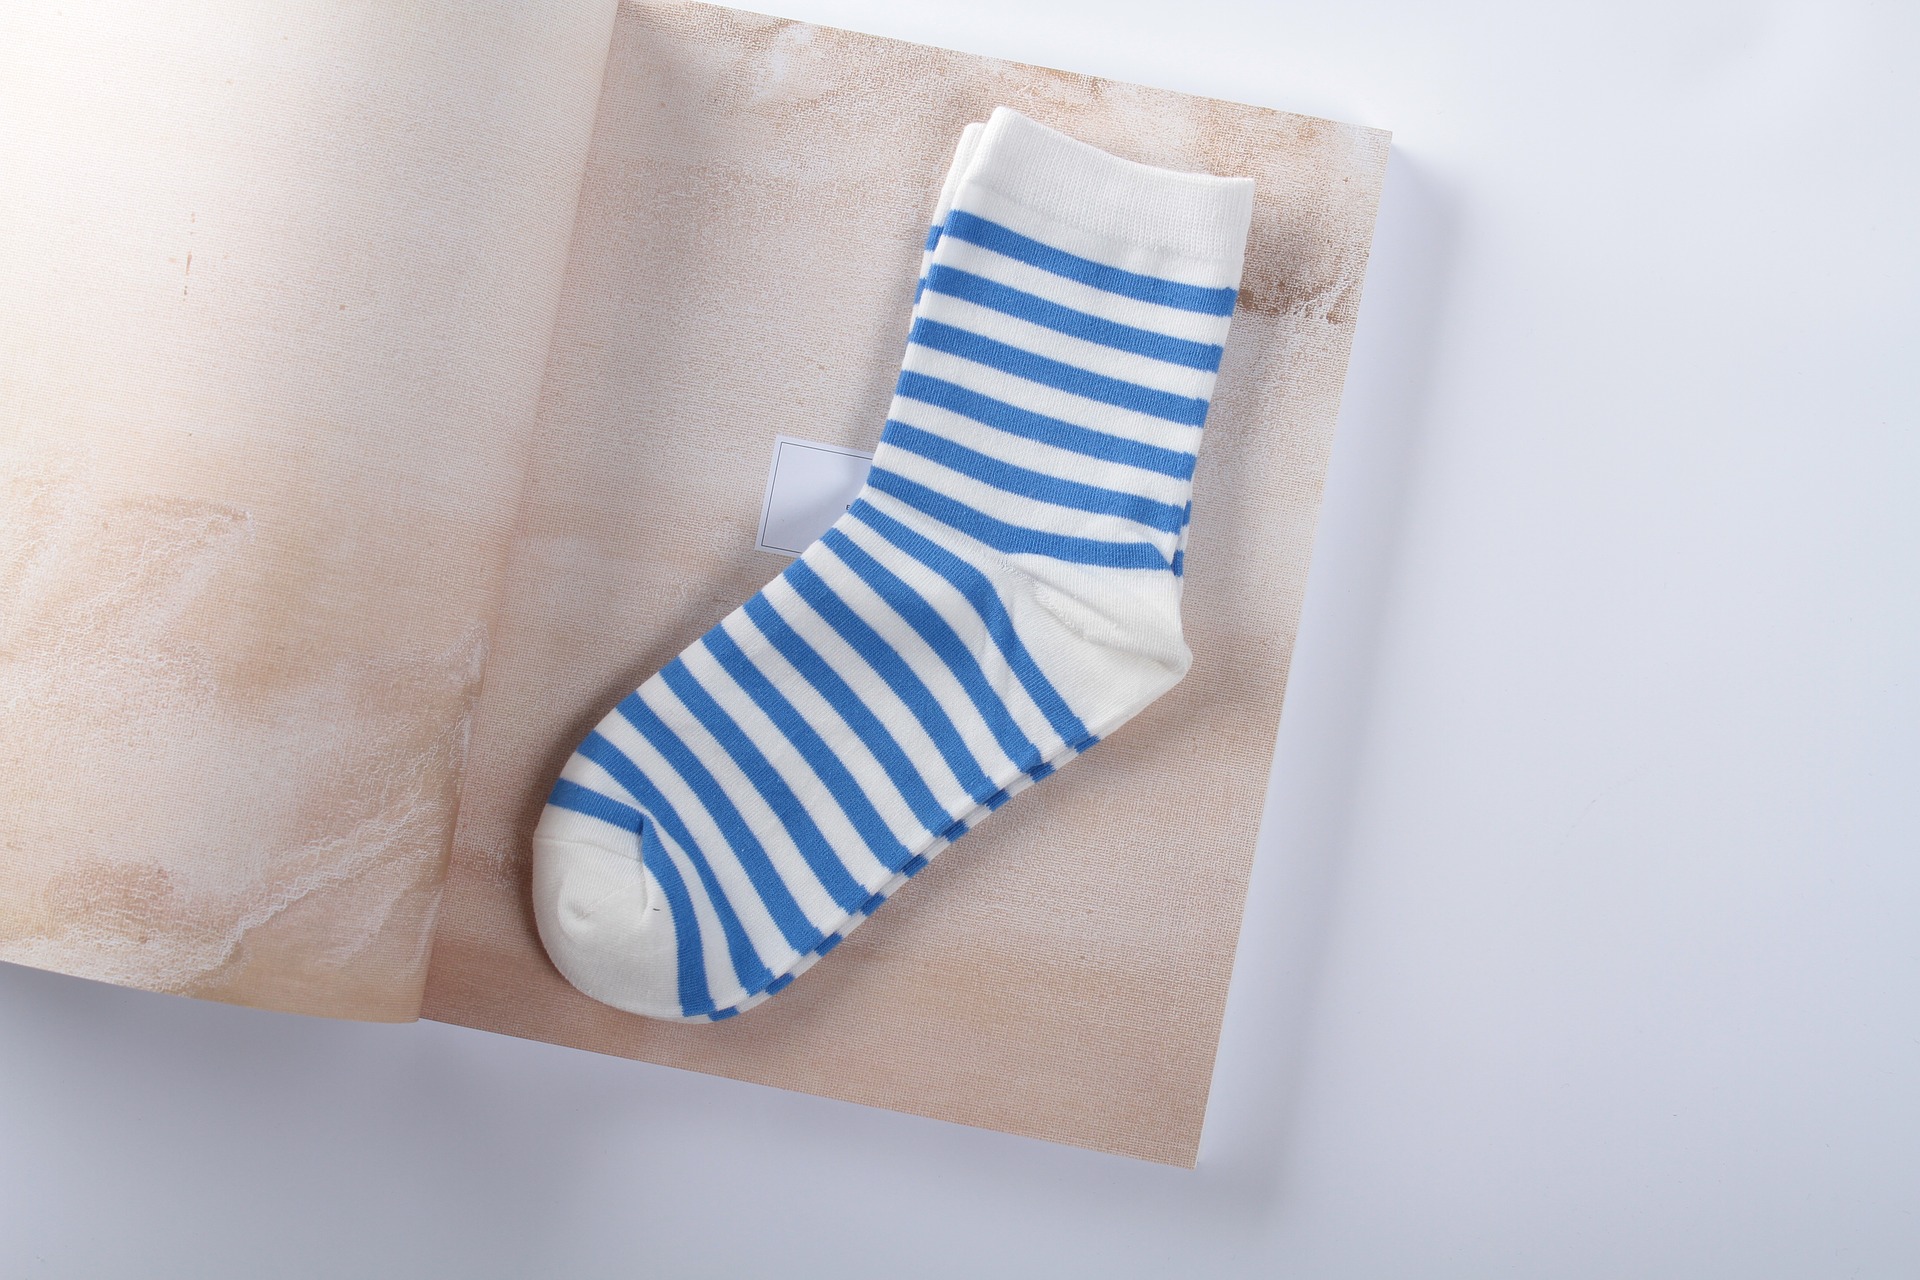 Founded back in 2013, David Heath’s sock company donates one pair for every pair sold